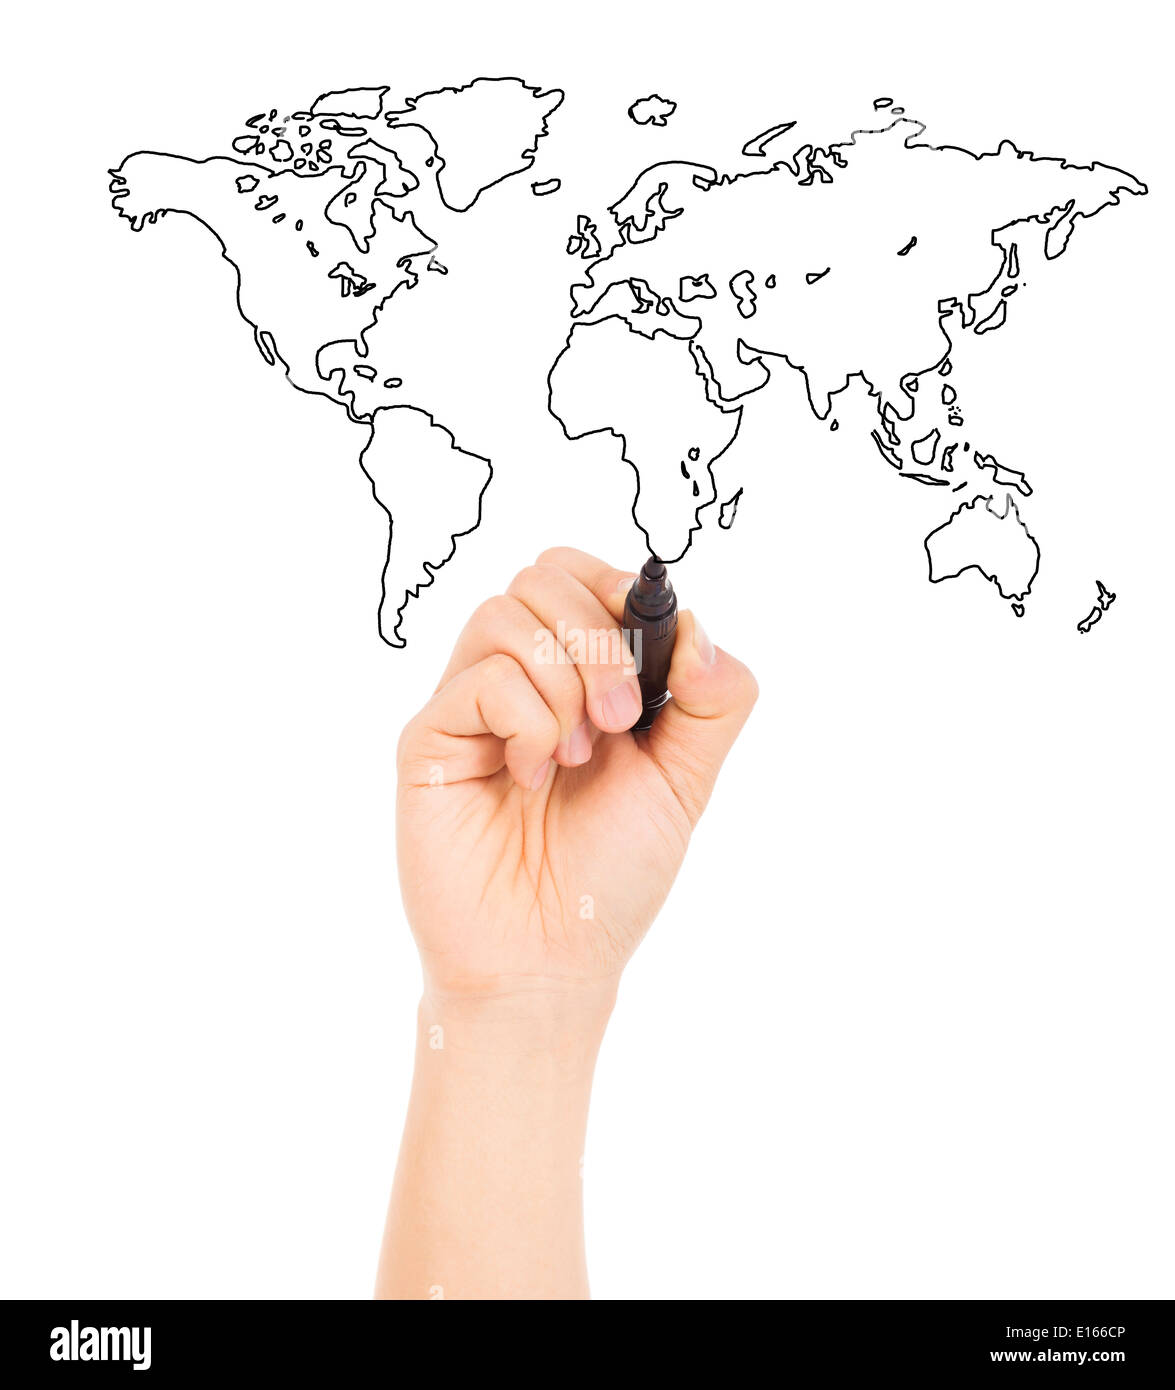 hand draw a concept picture about world map Stock Photo